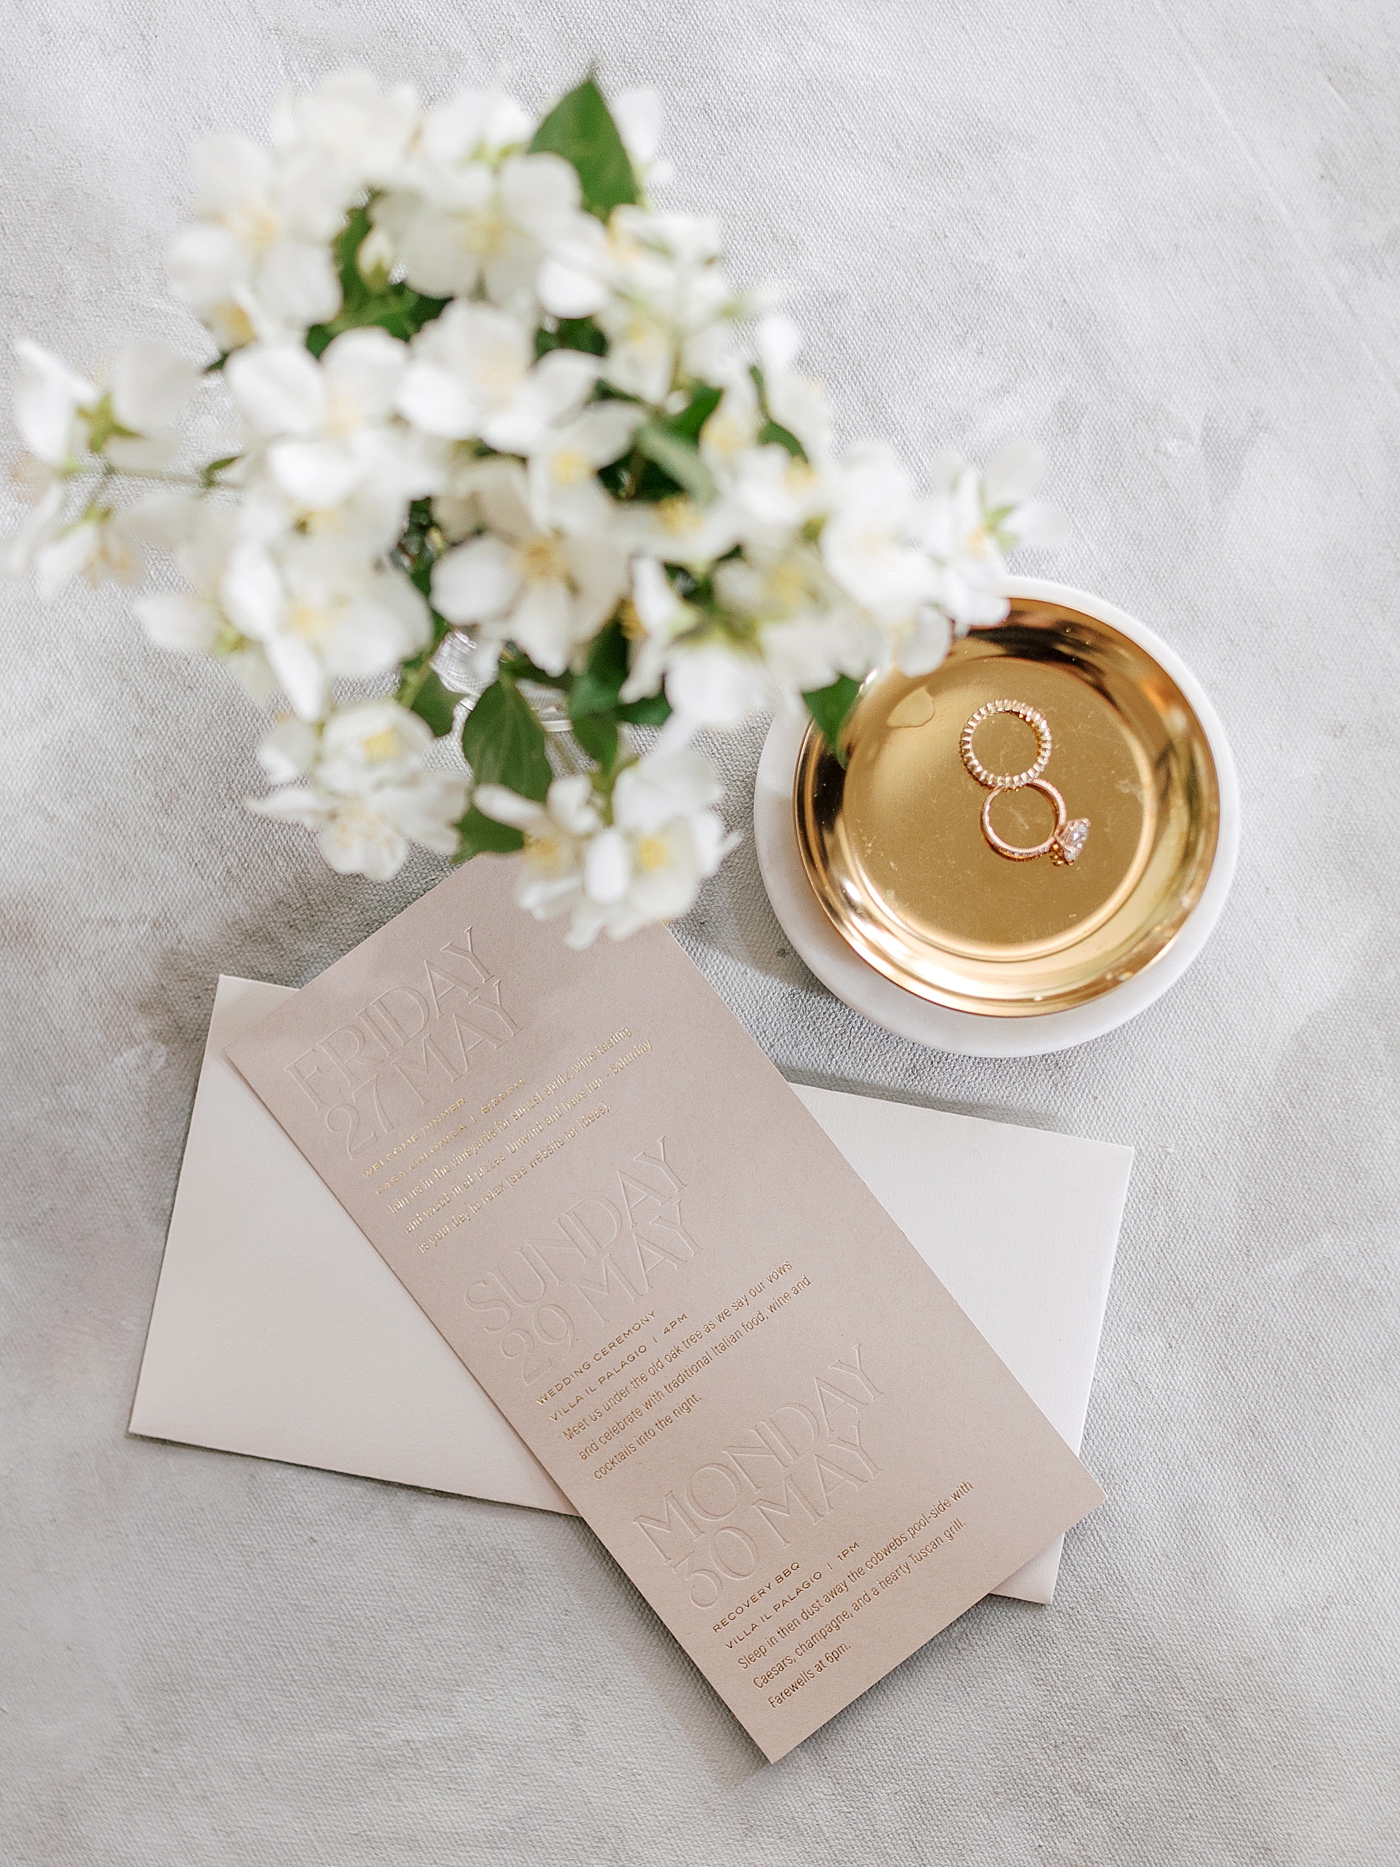 Gold ring dish with rings, white flowers, and a wedding invitation | Photo by NYC Wedding Photographer Hope Helmuth 